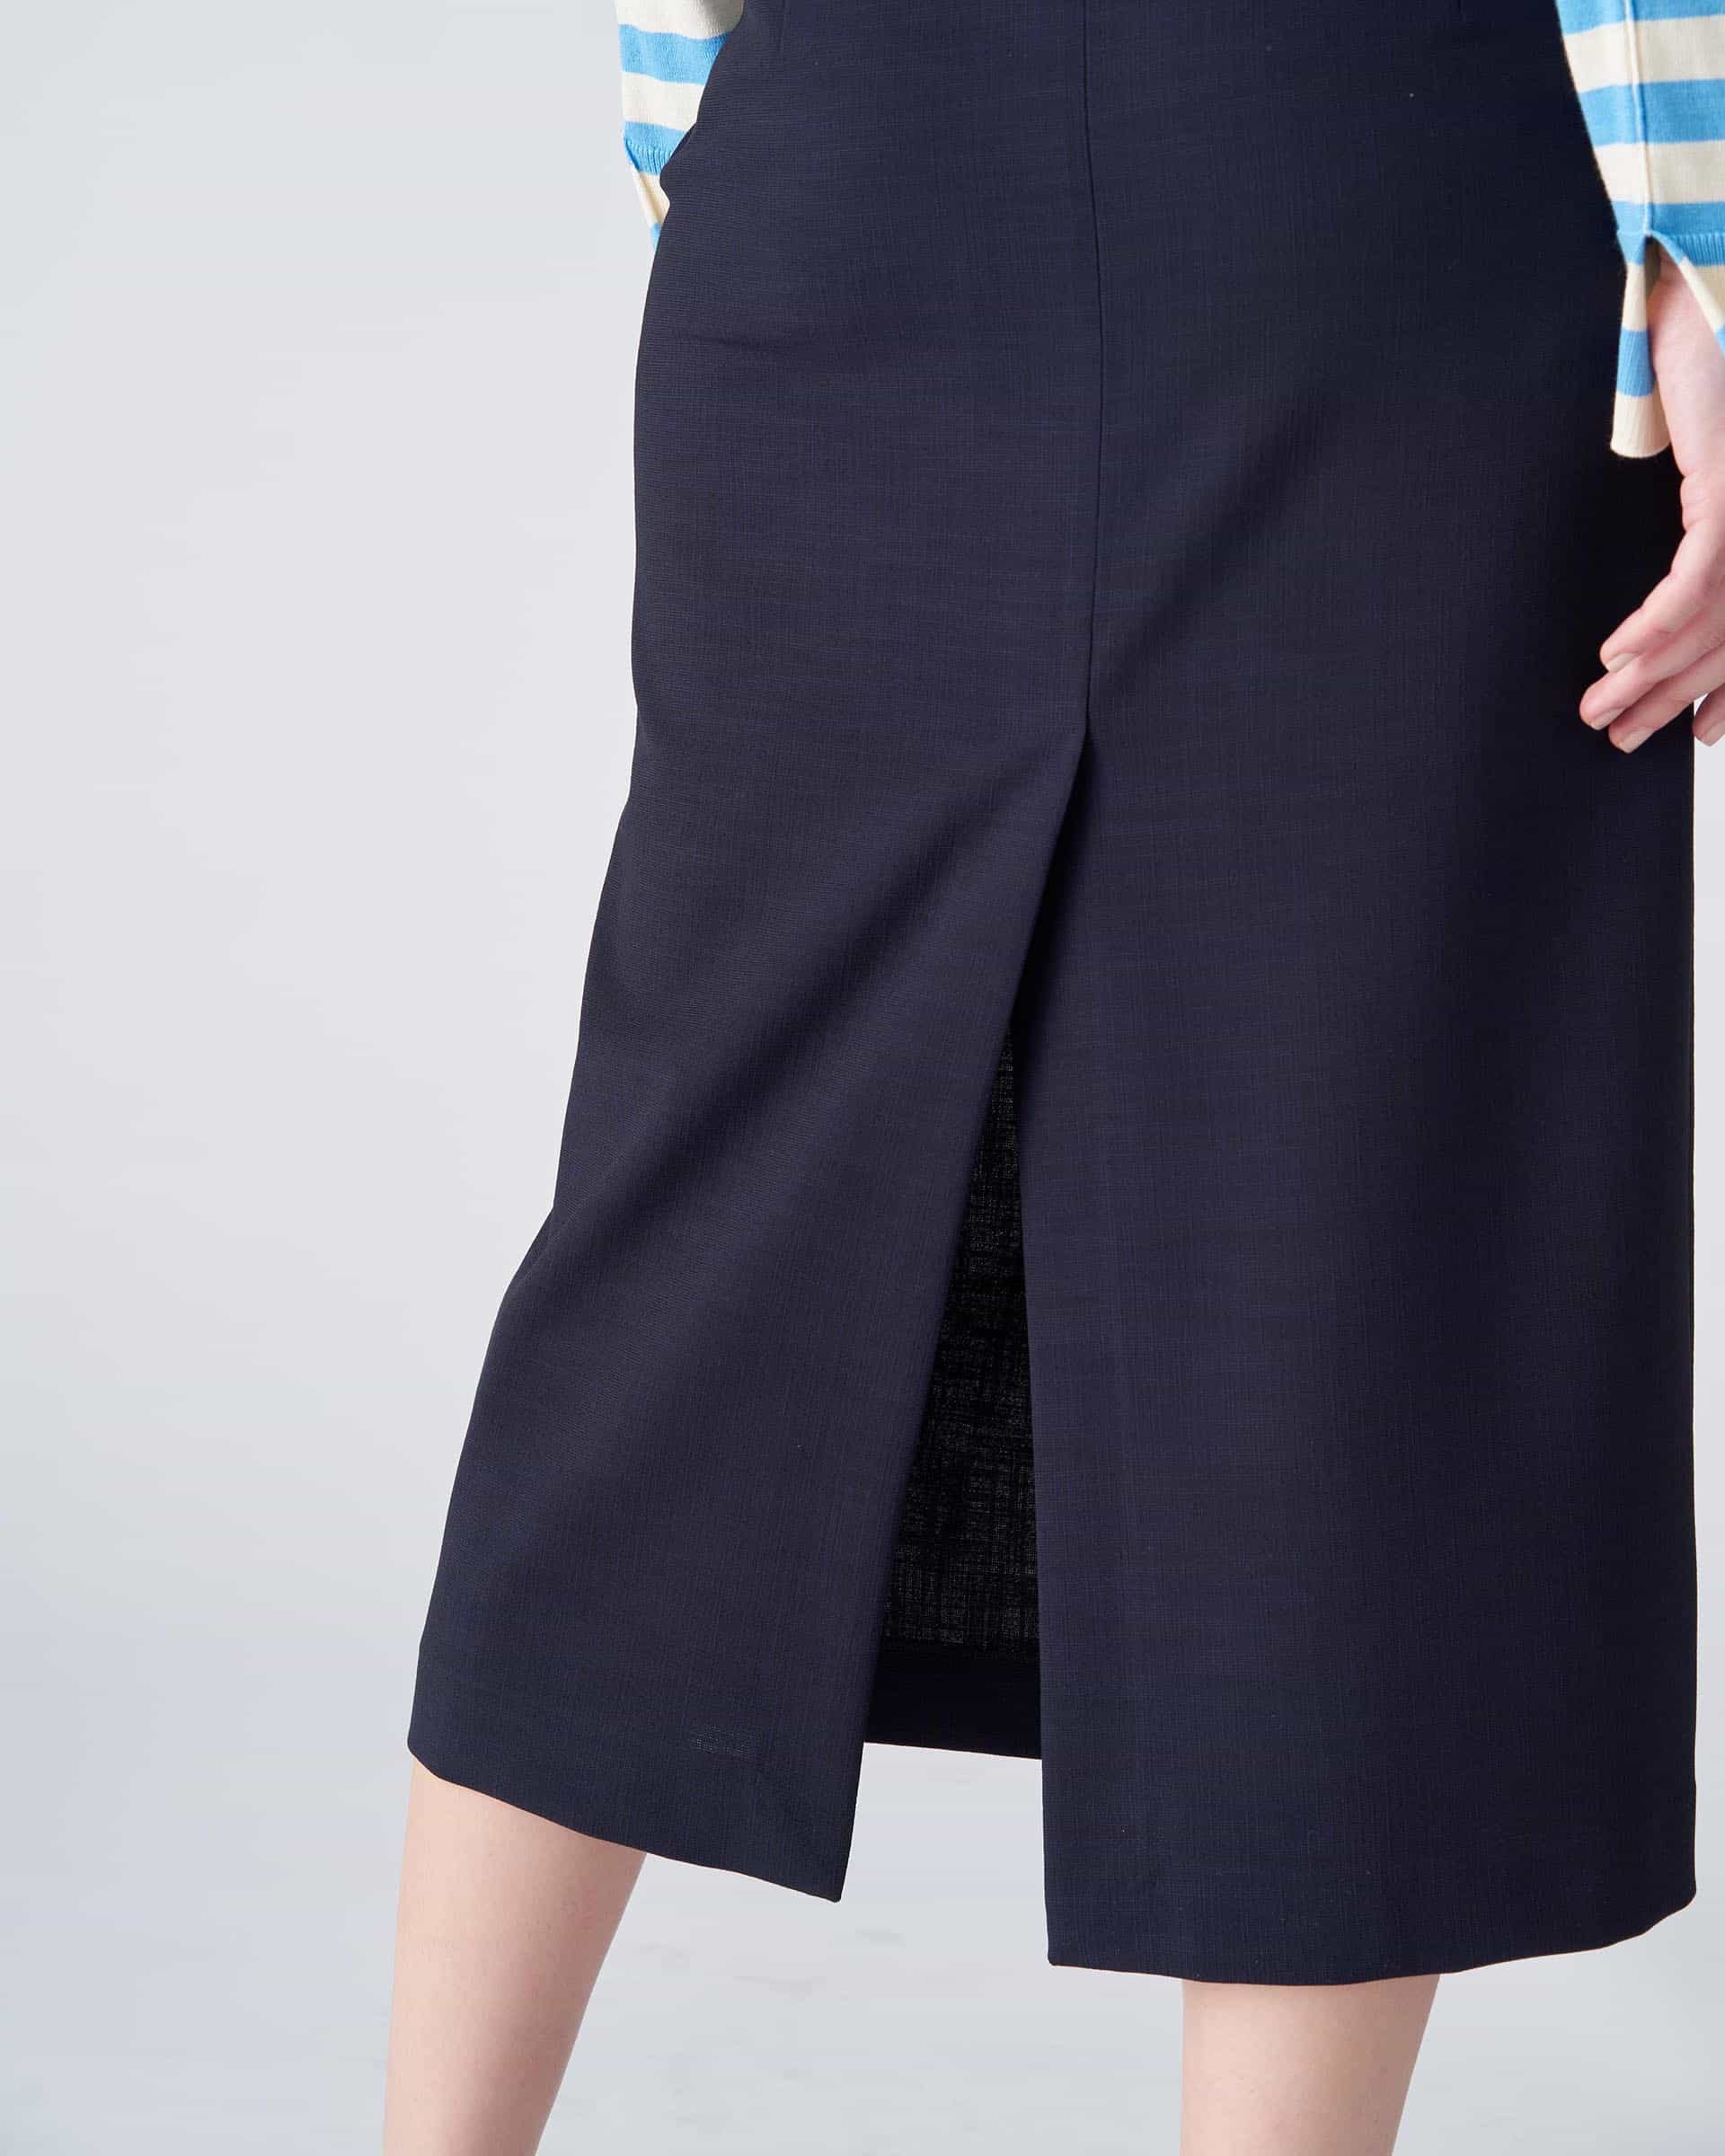 The Market Store | Pencil Skirt